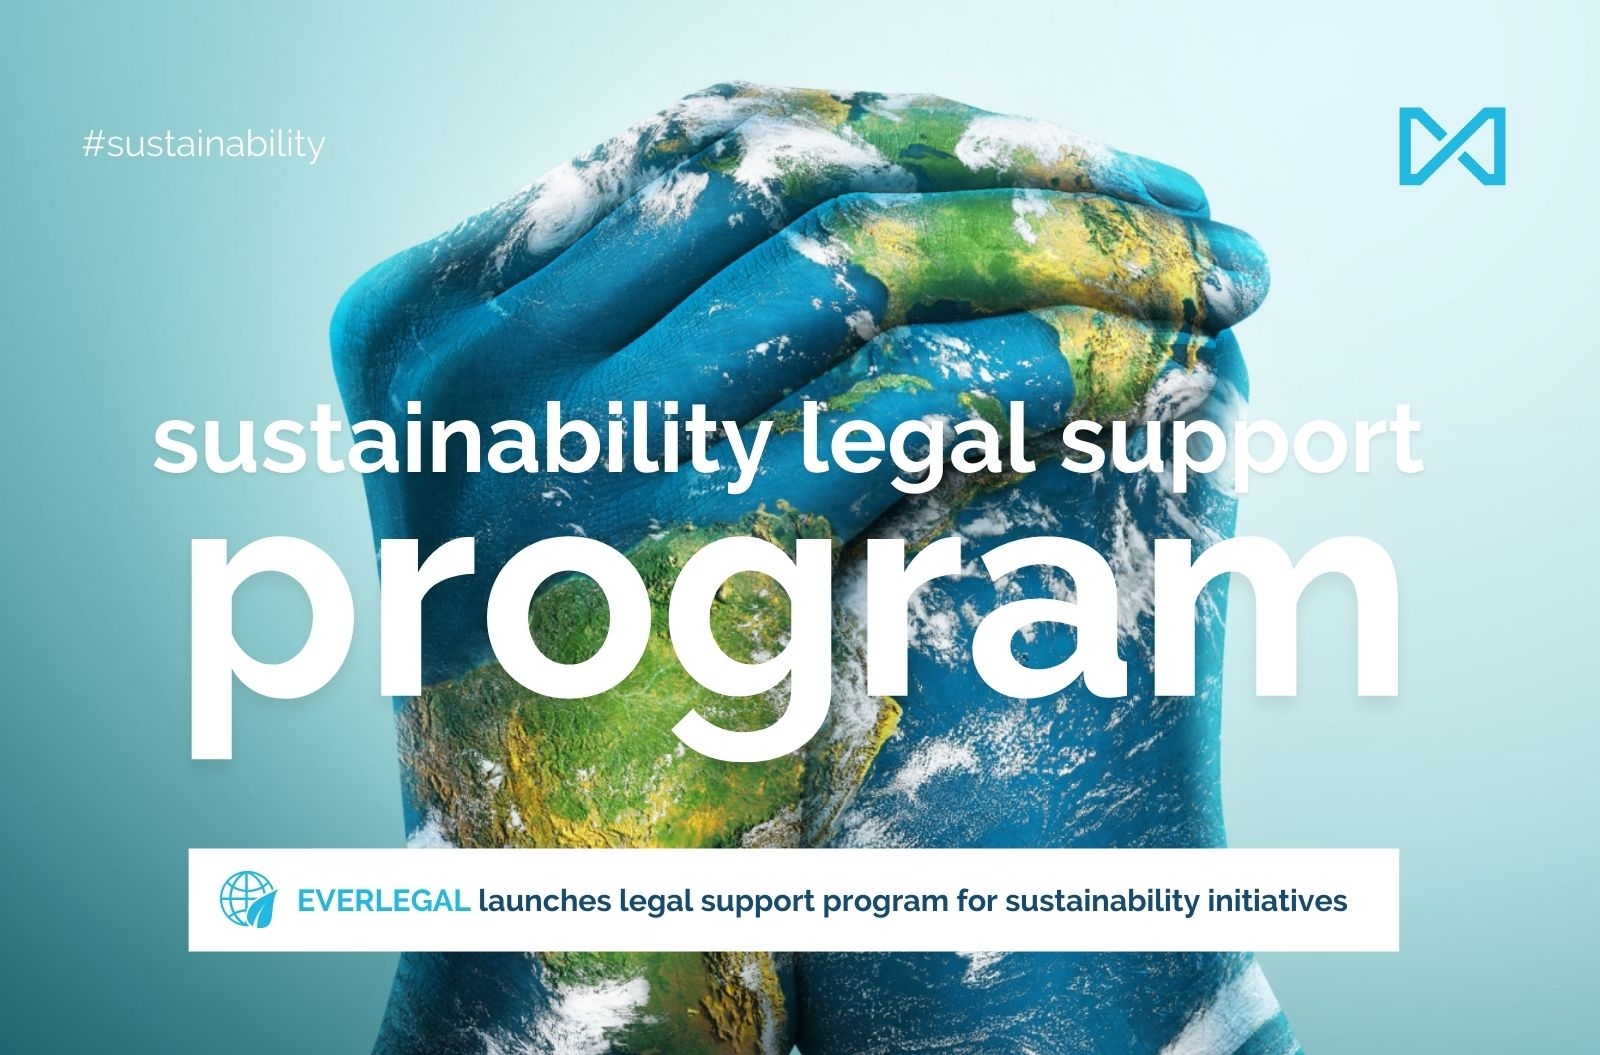 EVERLEGAL launches a legal support program for sustainability initiatives